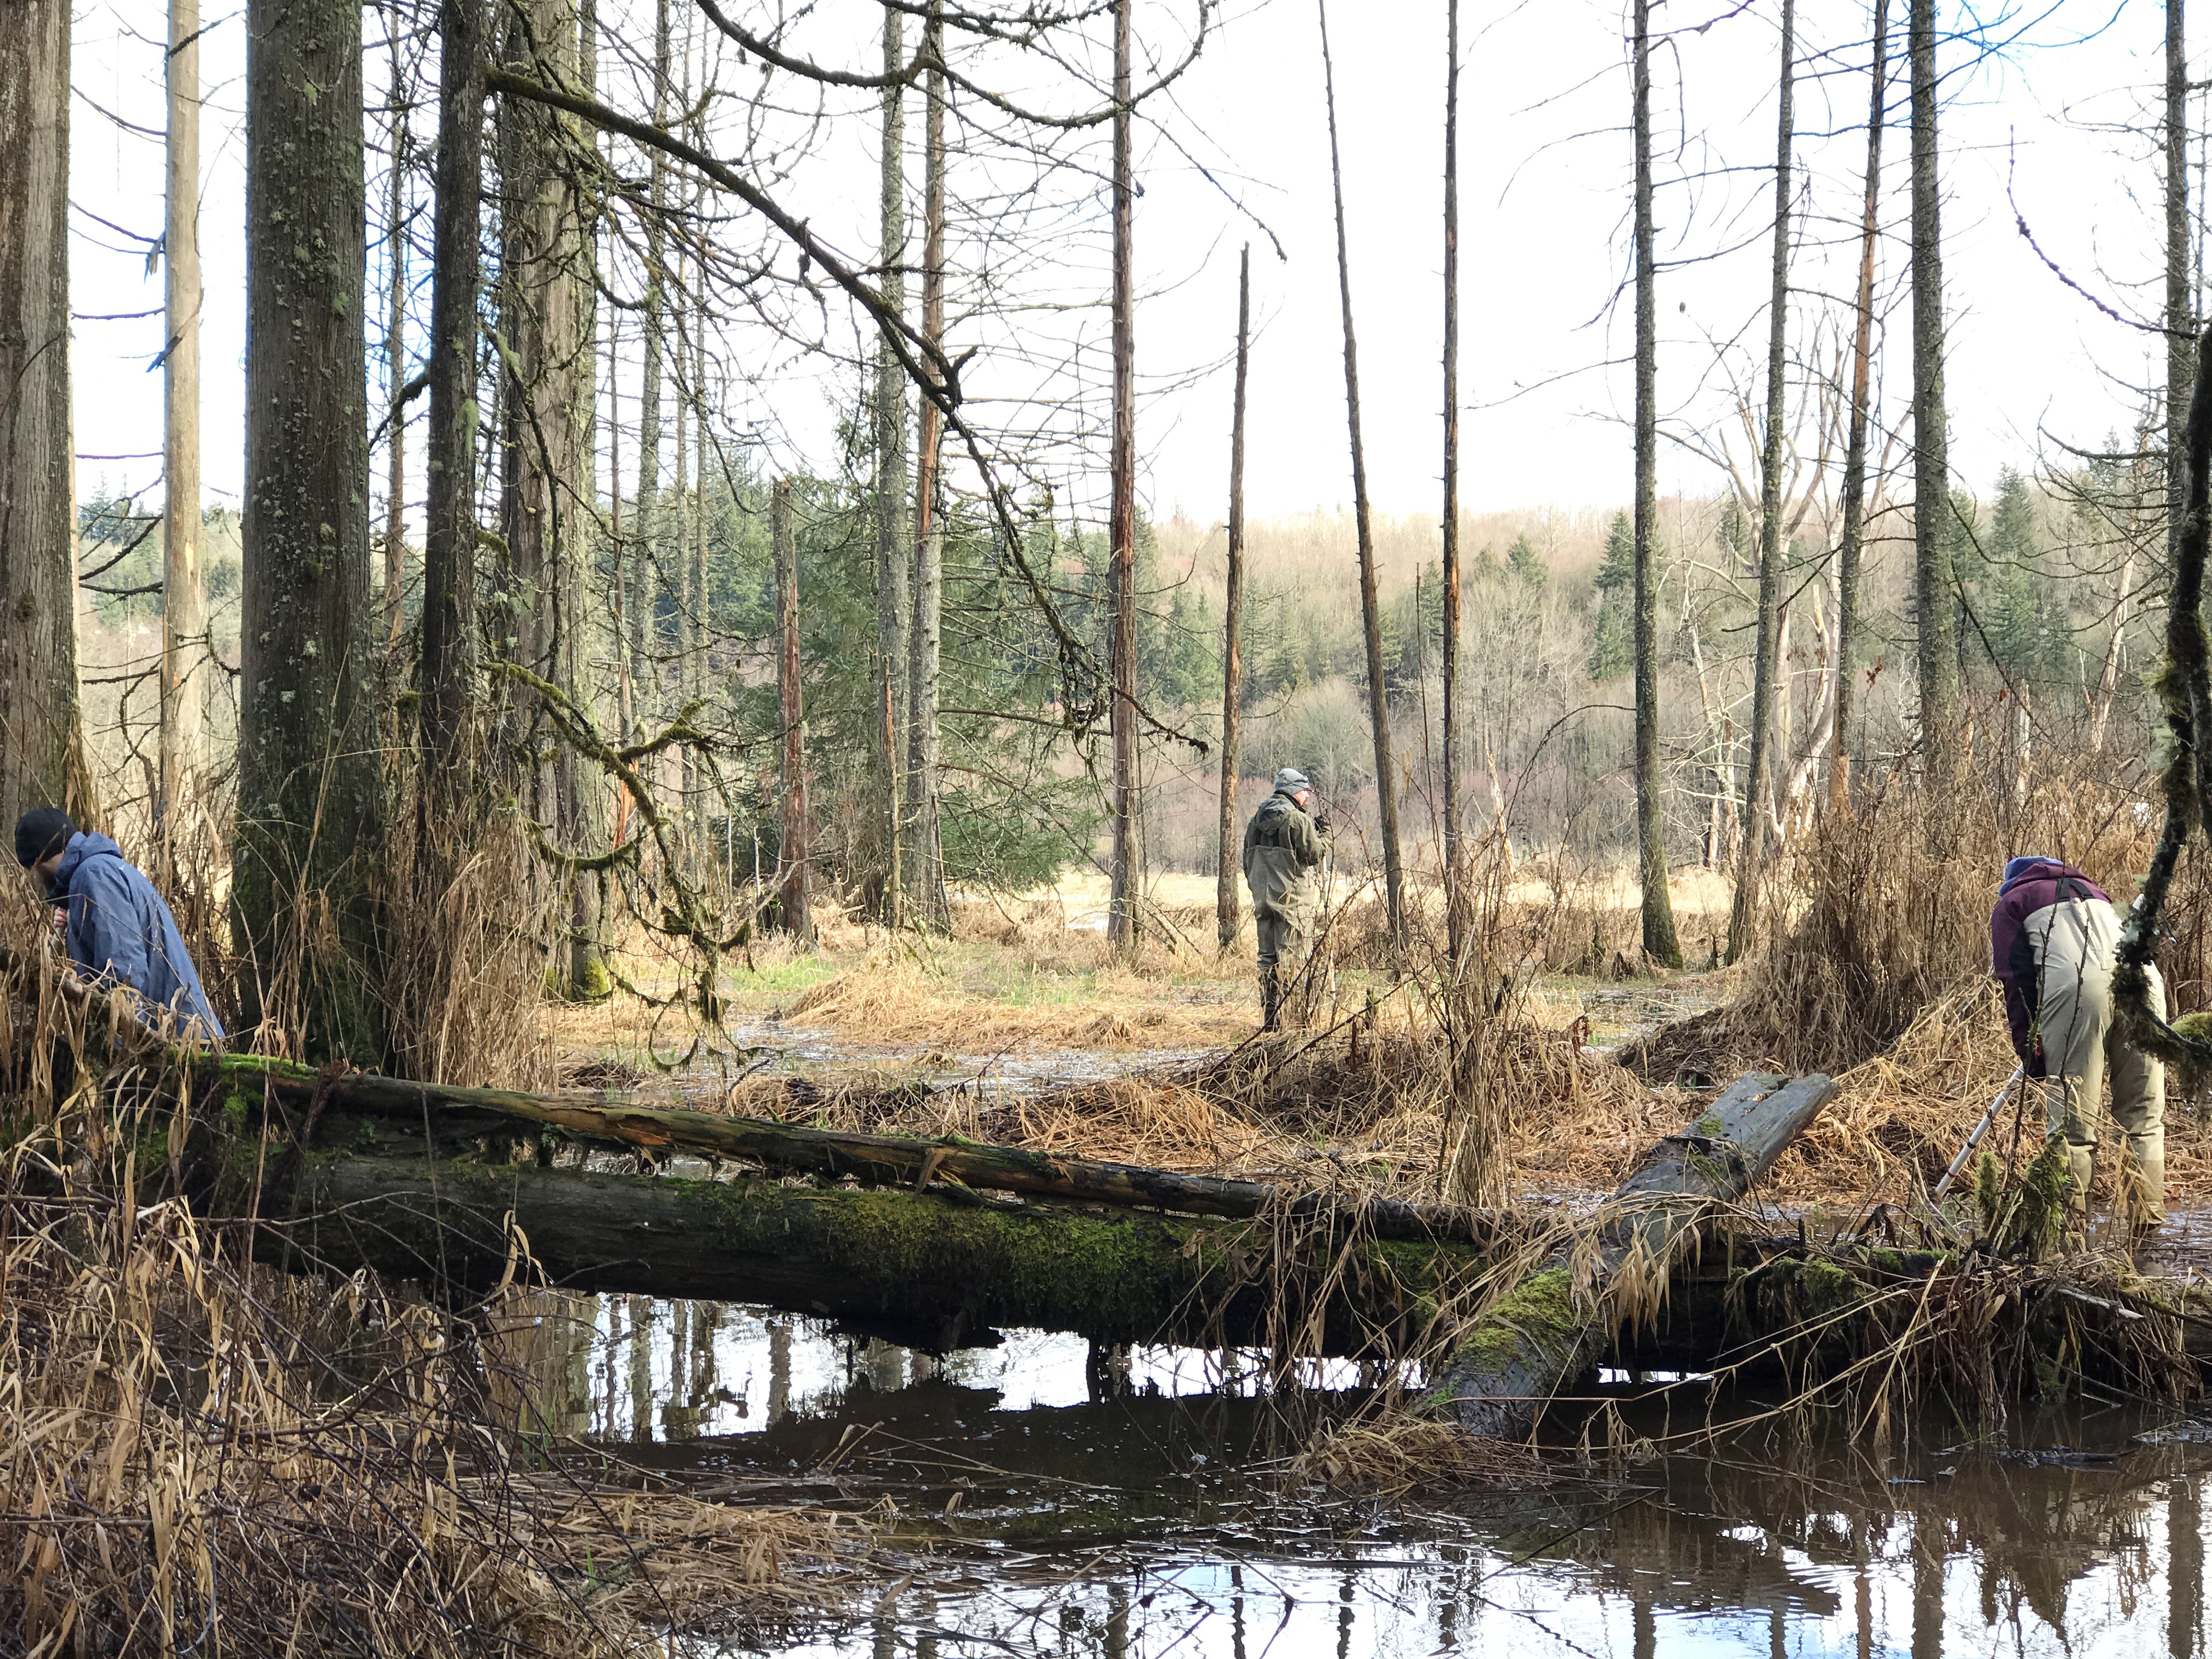 Volunteers measure water quality and biological diversity during an amphibian monitoring citizen science project at Big Lake Wetlands Conservation Area, March 2018. Photograph credit: Skagit Land Trust staff.